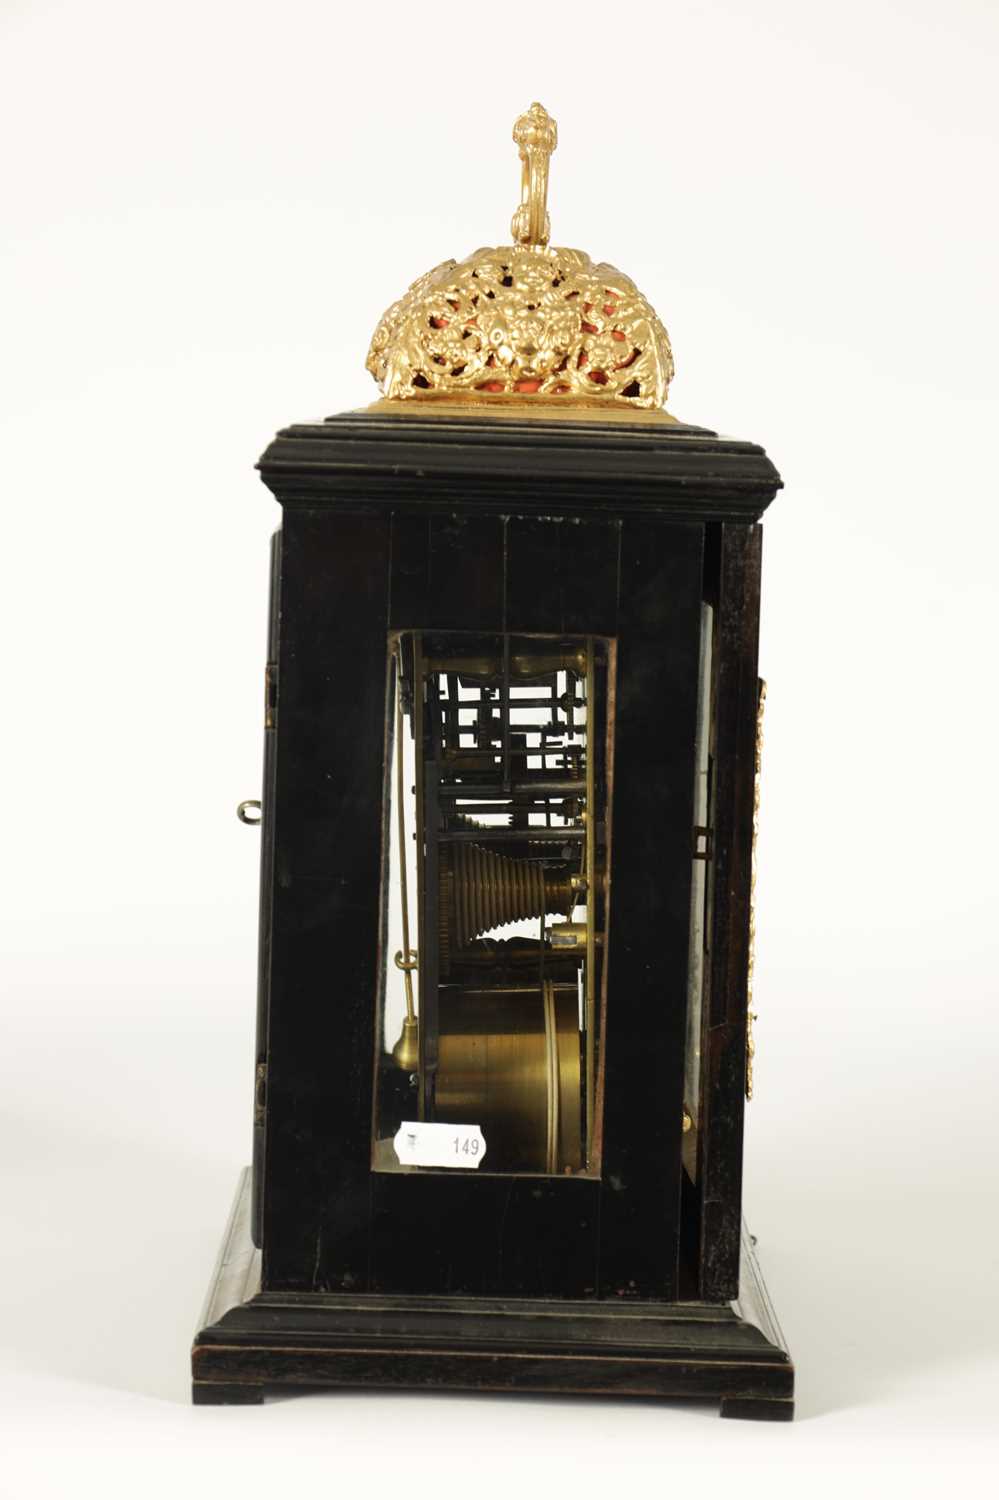 EDMUND APPLY, AT CHARING CROSS. A WILLIAM AND MARY EBONY VENEERED GILT BRASS MOUNTED BASKET TOP BRAC - Image 6 of 18